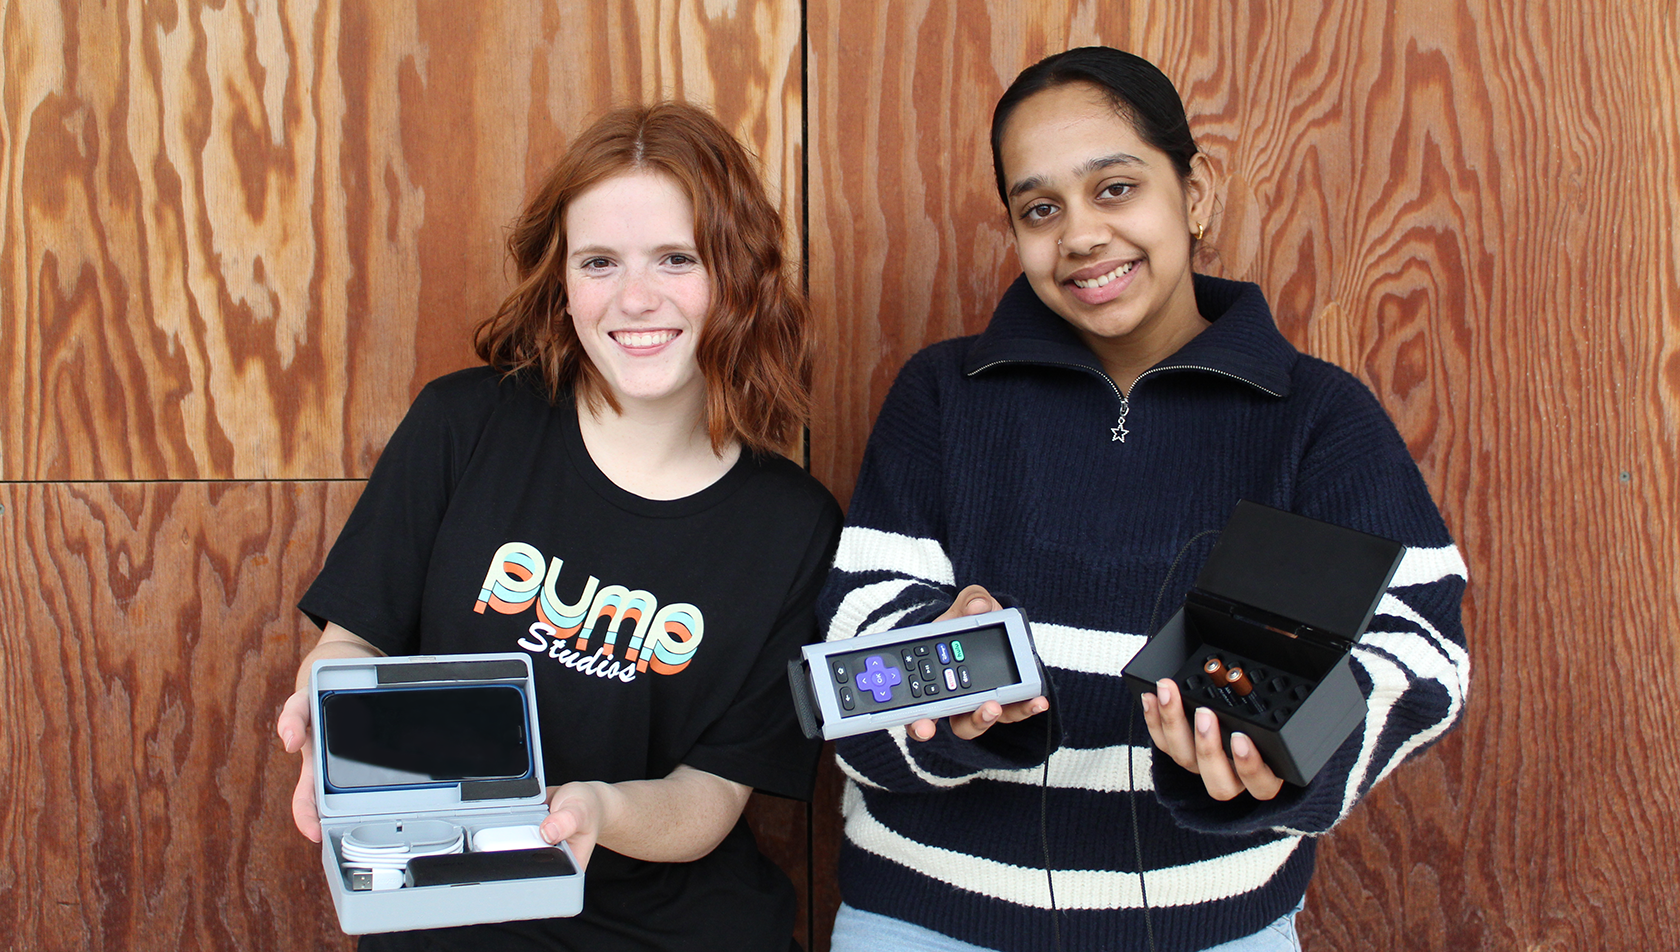 Junior interns Iris and Sivi standing with their 3D printed toolboxes in front of a wood paneled wall.